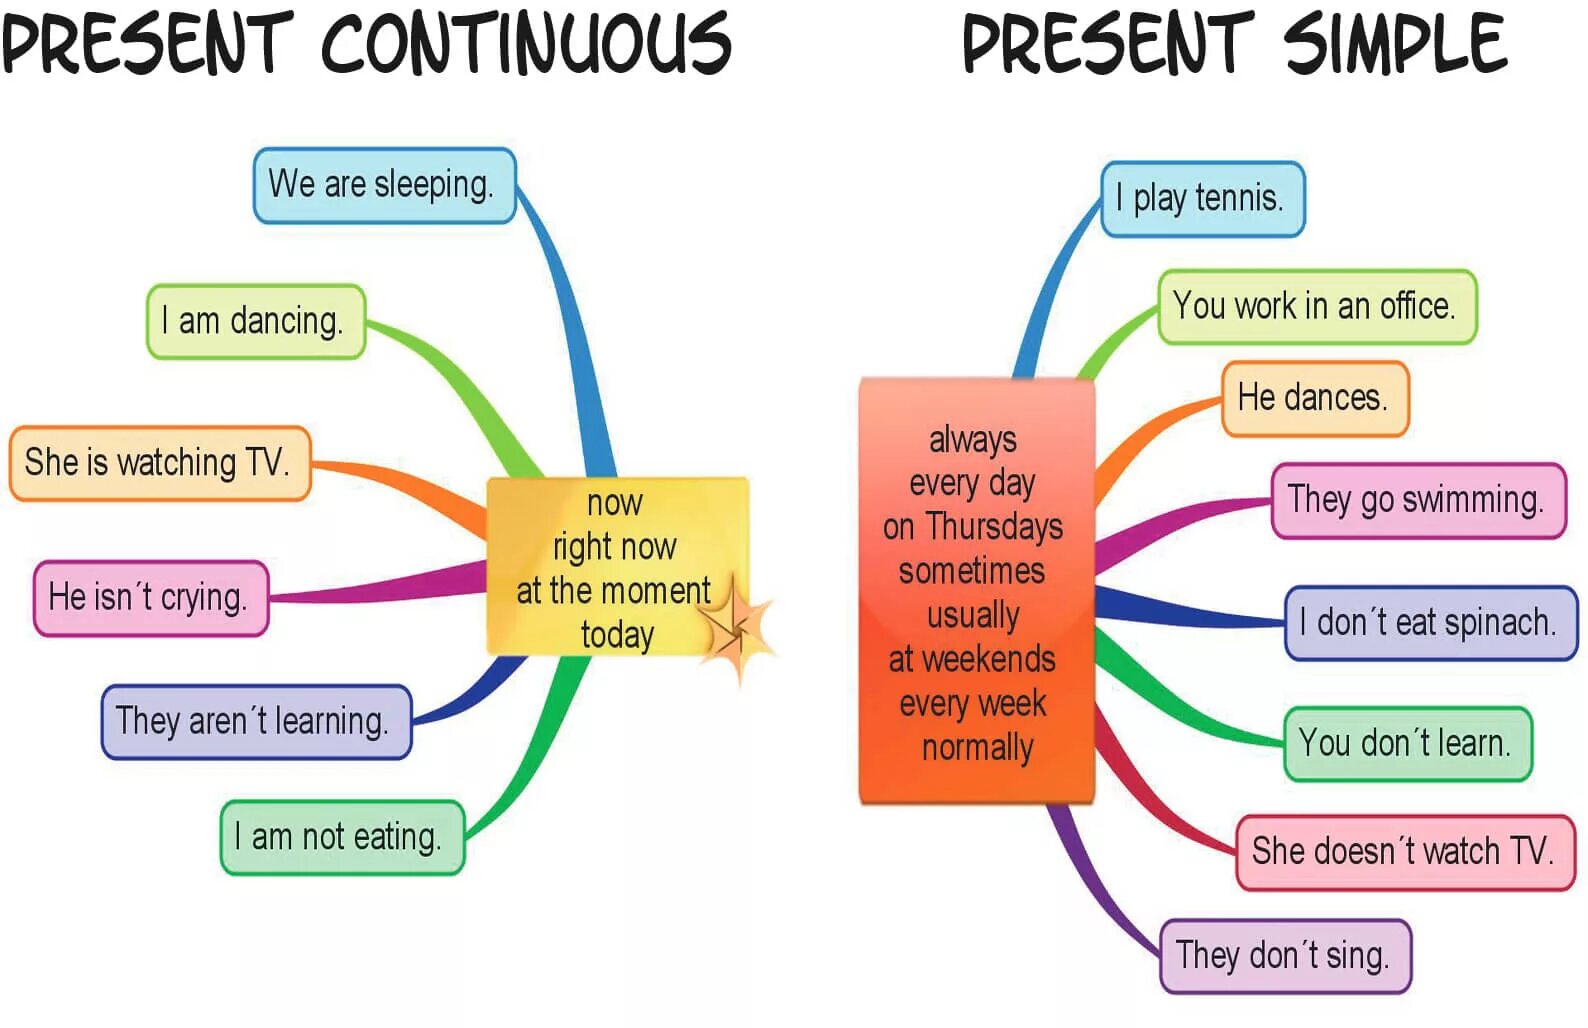 Something you have never had. Present simple vs present Continuous правила. Present simple vs present Continuous правило. Present simple or present Continuous отличия. Present simple or present Continuous правило.